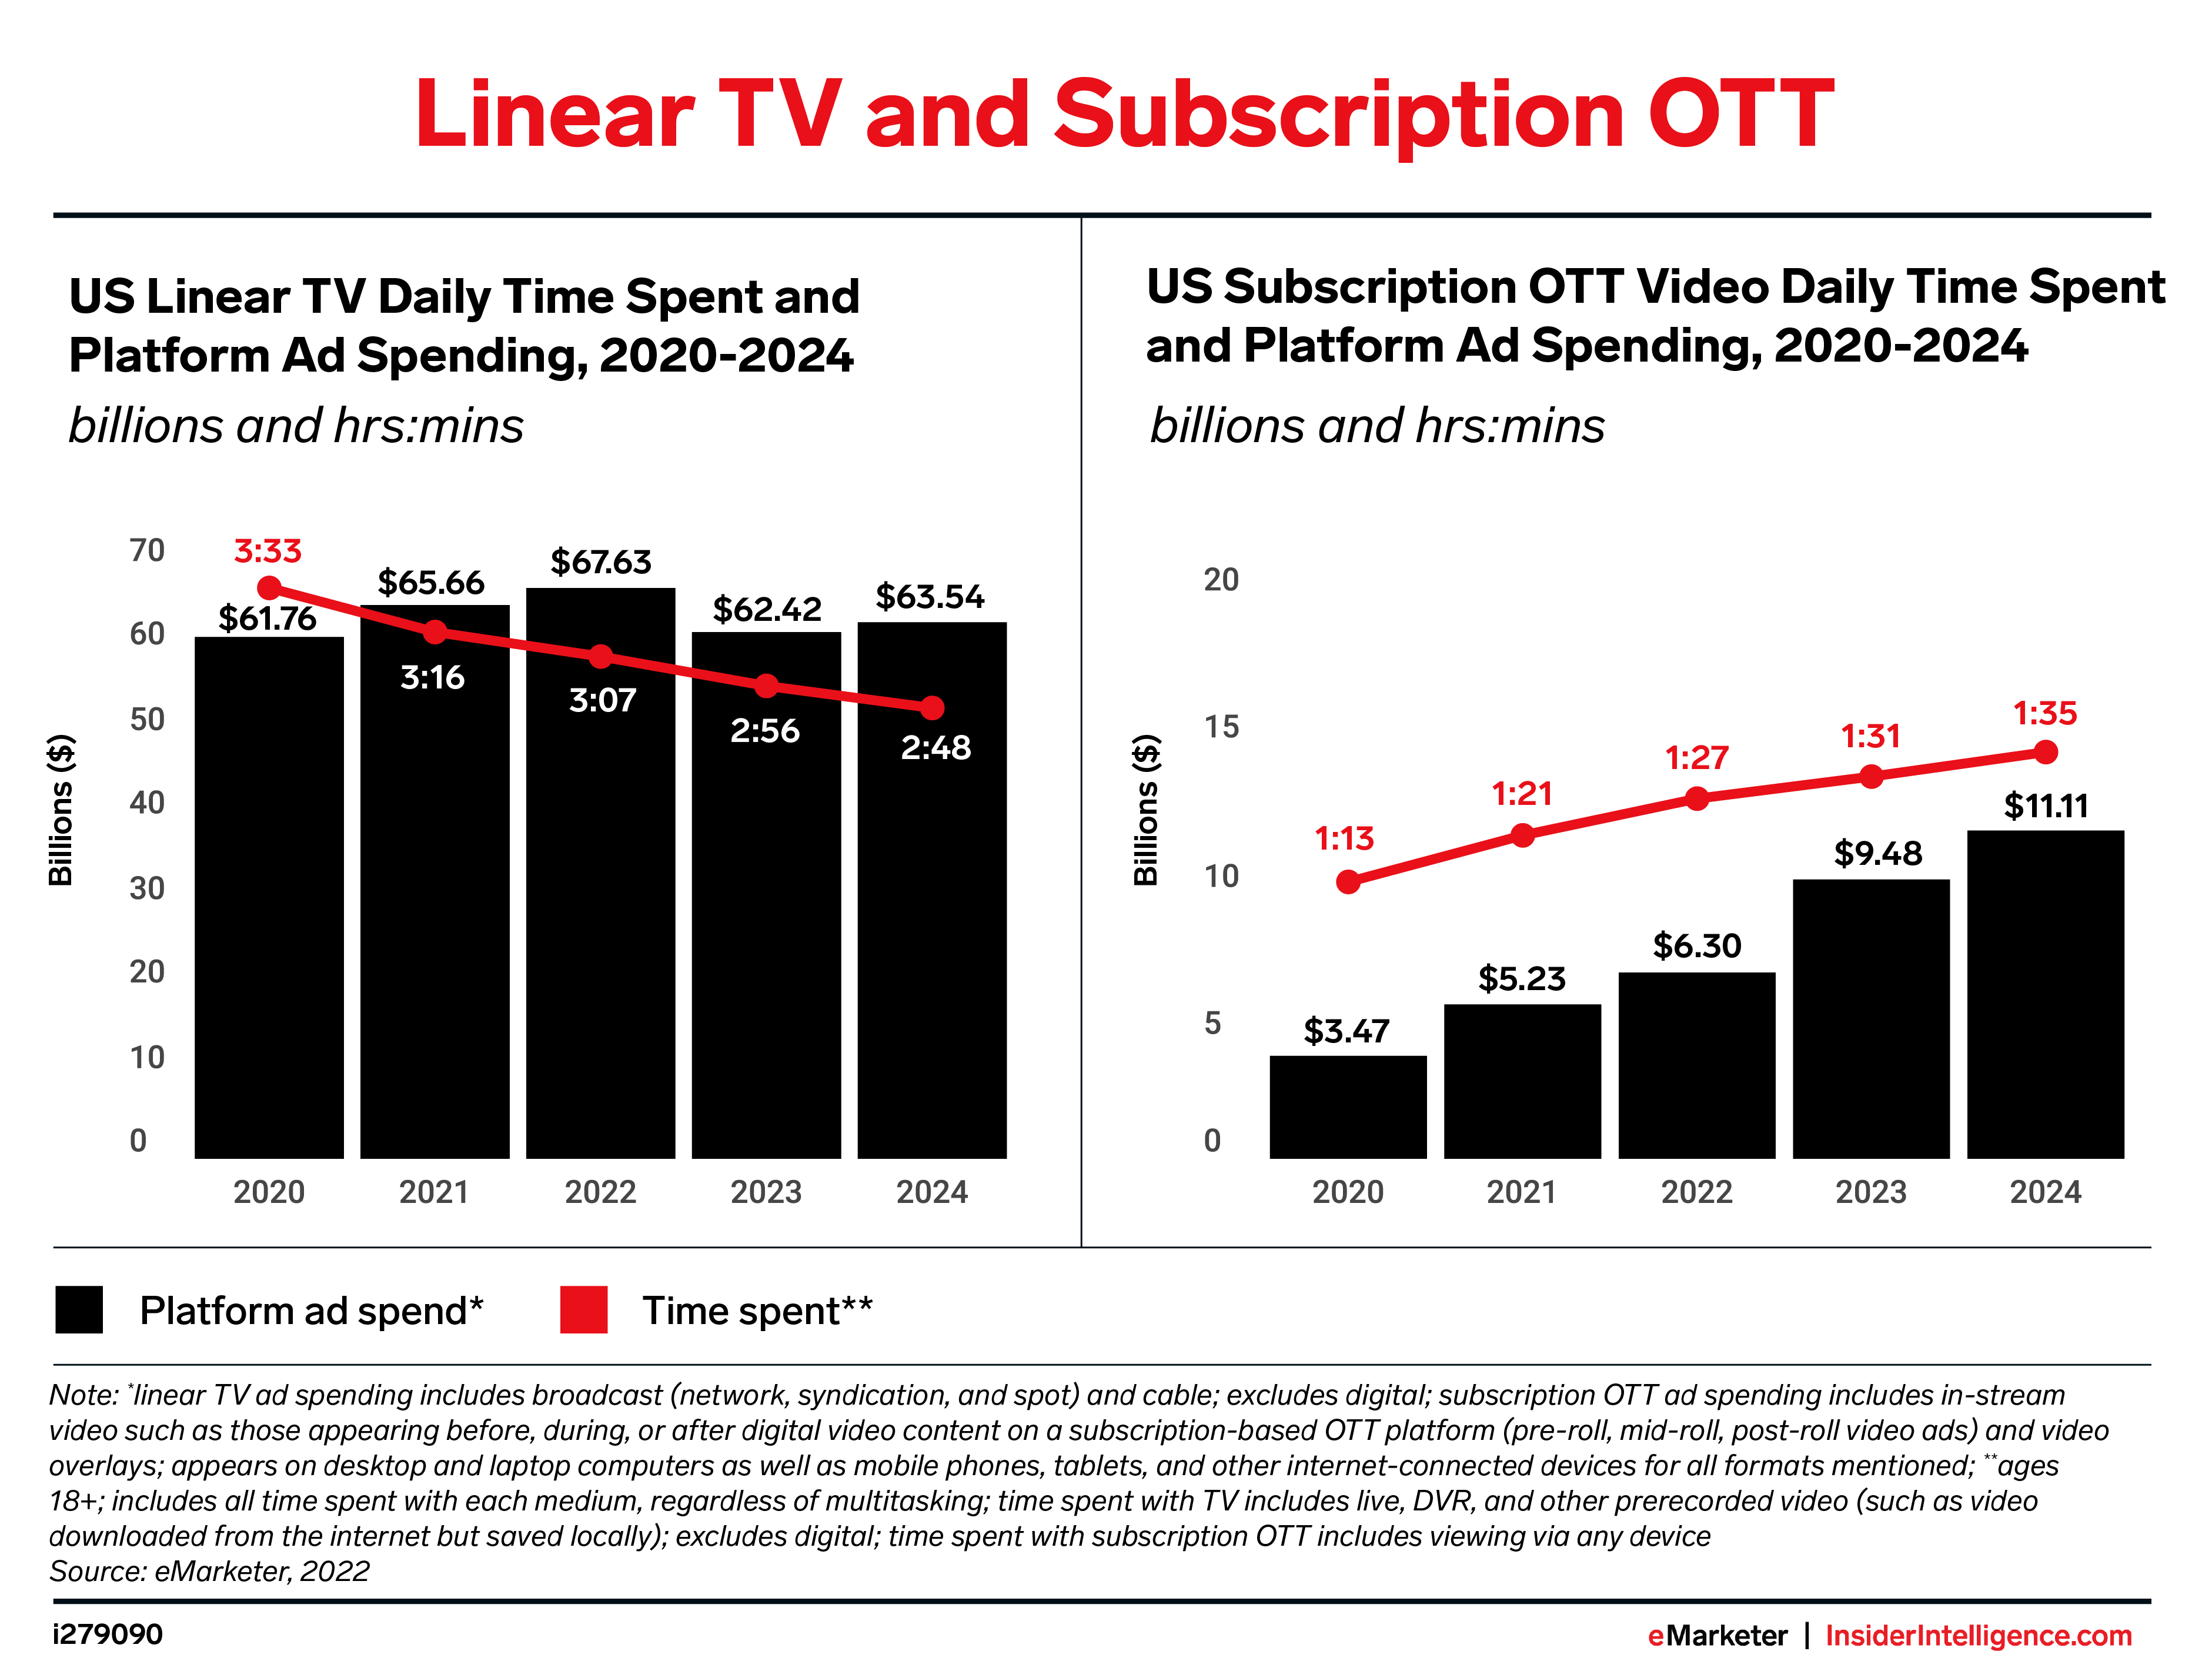 Linear TV and Subscription OTT, 2020-2024 (billions and hrs:mins)